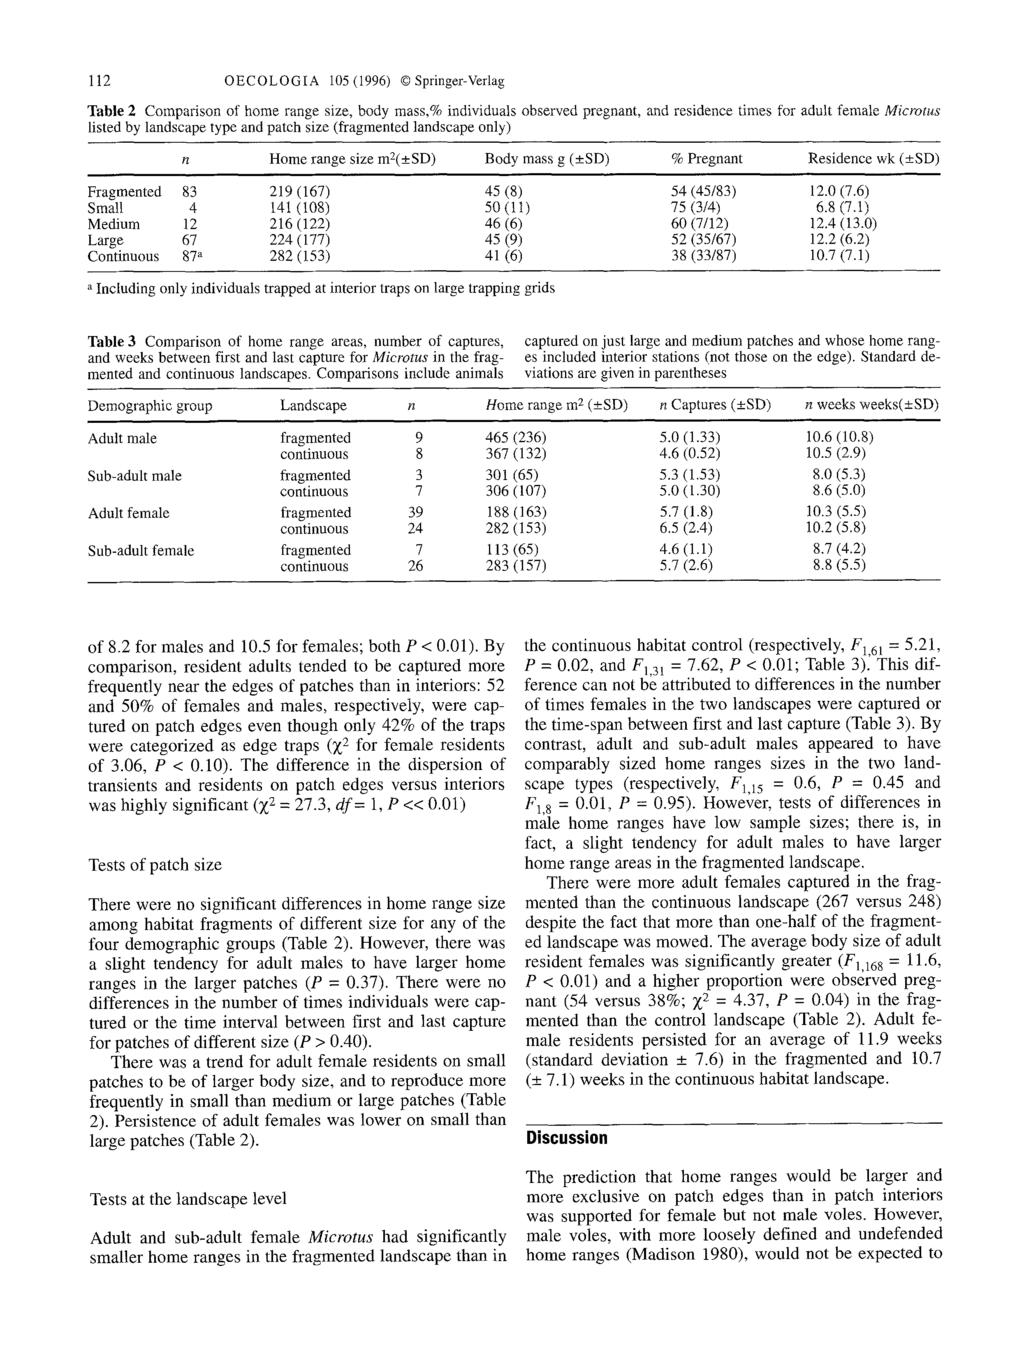 112 OECOLOGIA 105 (1996) 9 Springer-Verlag Table 2 Comparison of home range size, body mass,% individuals observed pregnant, and residence times for adult female Microtus listed by landscape type and